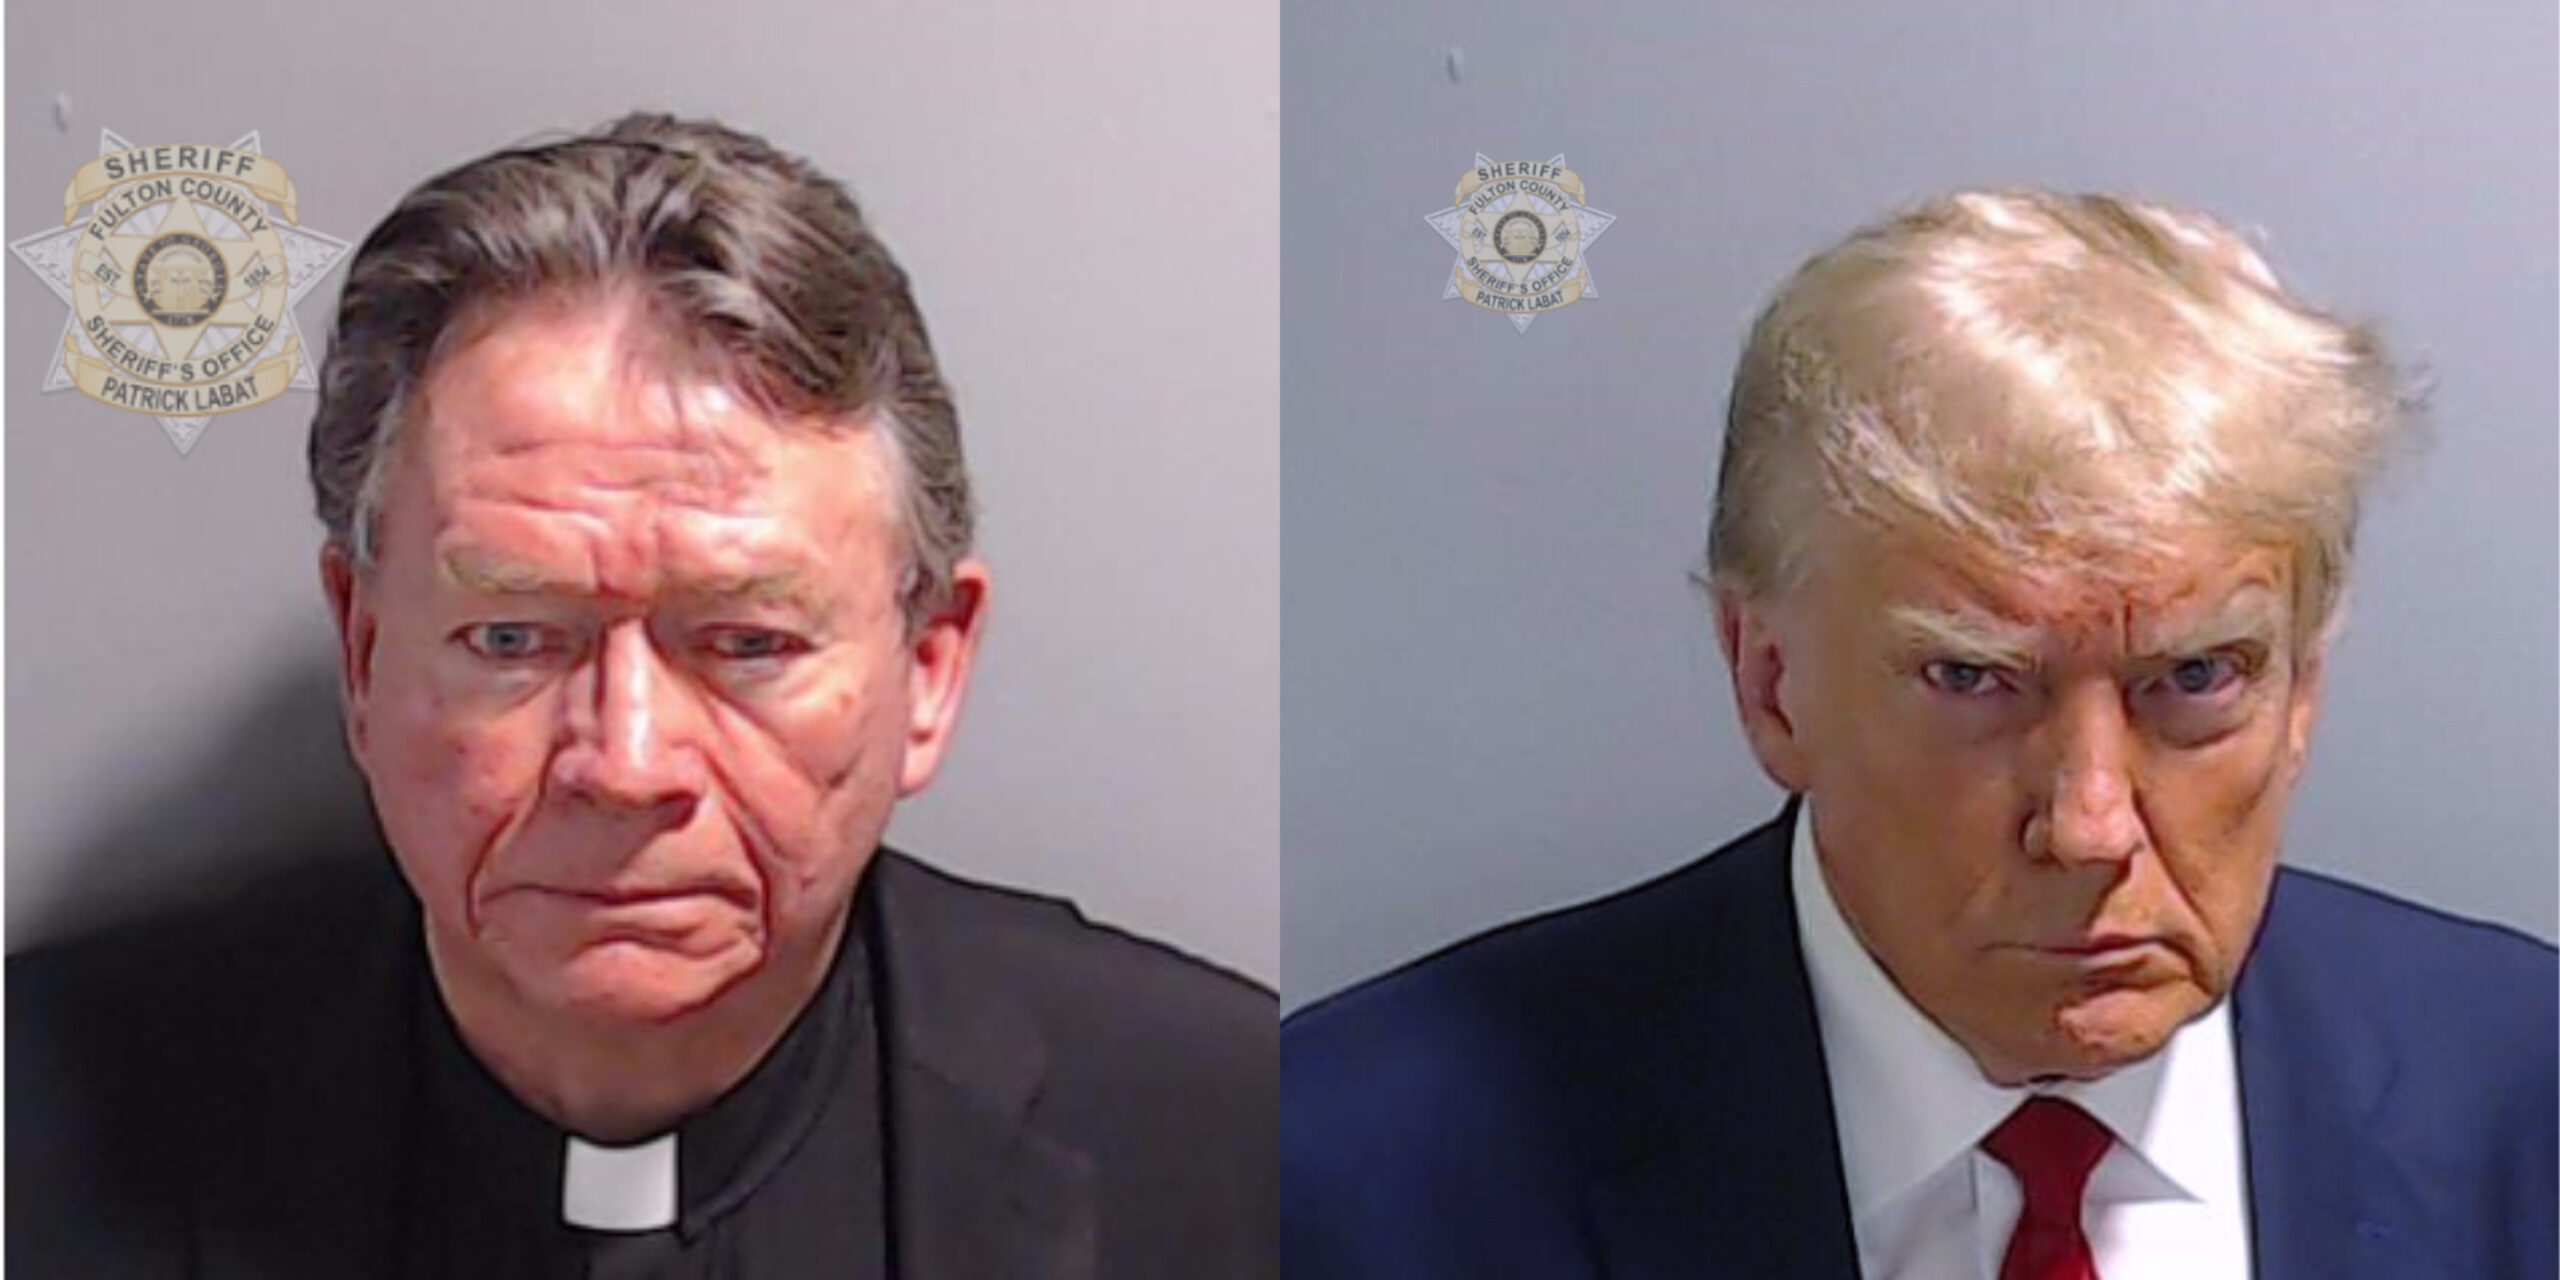 Last Trump Co-Defendant Booked While Rocking Clerical Collar